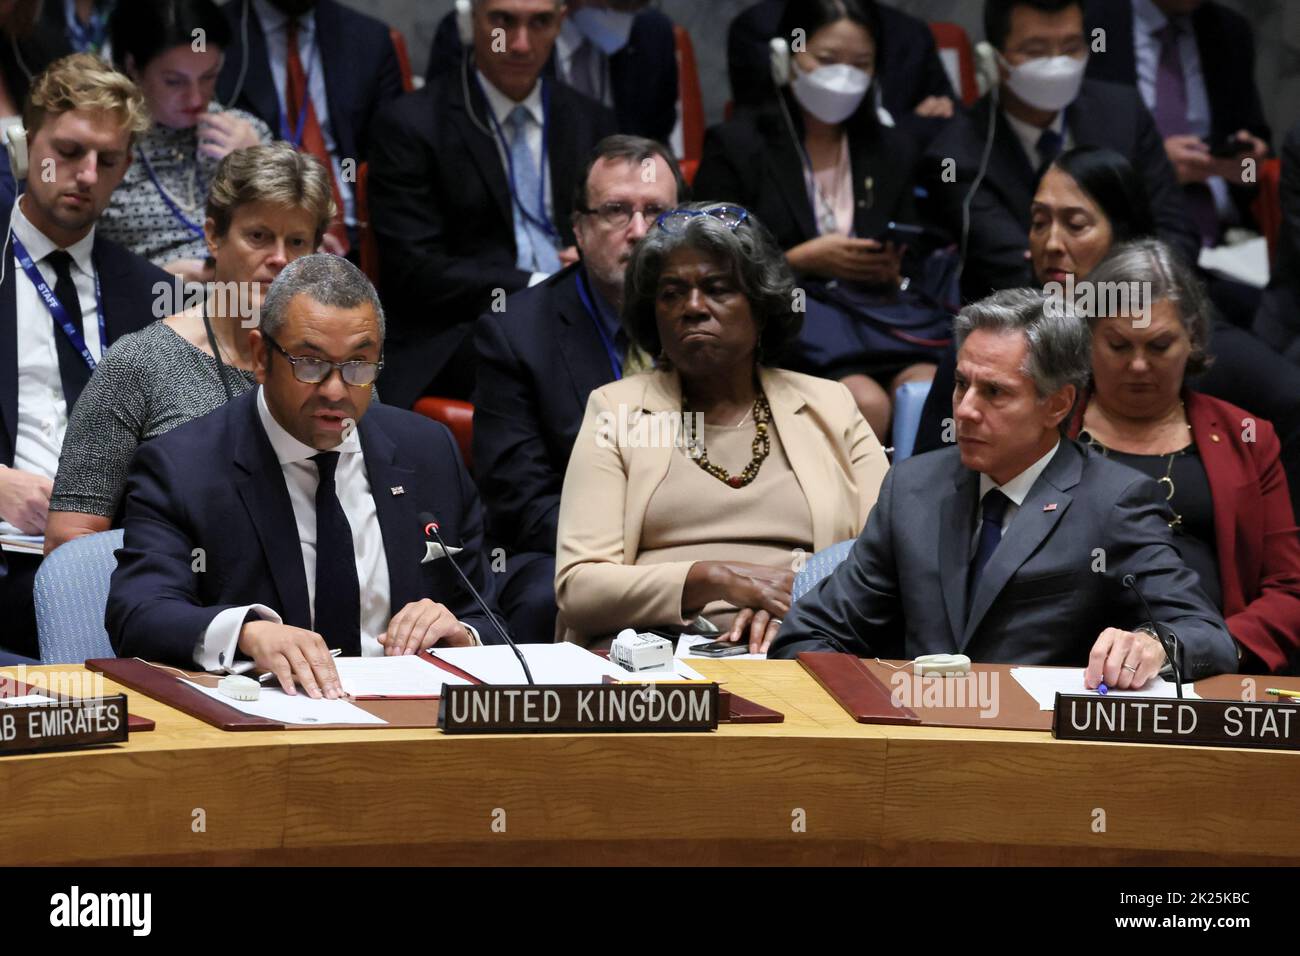 Britain's Foreign Secretary James Cleverly speaks during a high level meeting of the United Nations Security Council on the situation amid Russia's invasion of Ukraine, at the 77th Session of the United Nations General Assembly at U.N. Headquarters in New York City, U.S., September 22, 2022. REUTERS/Brendan McDermid Stock Photo